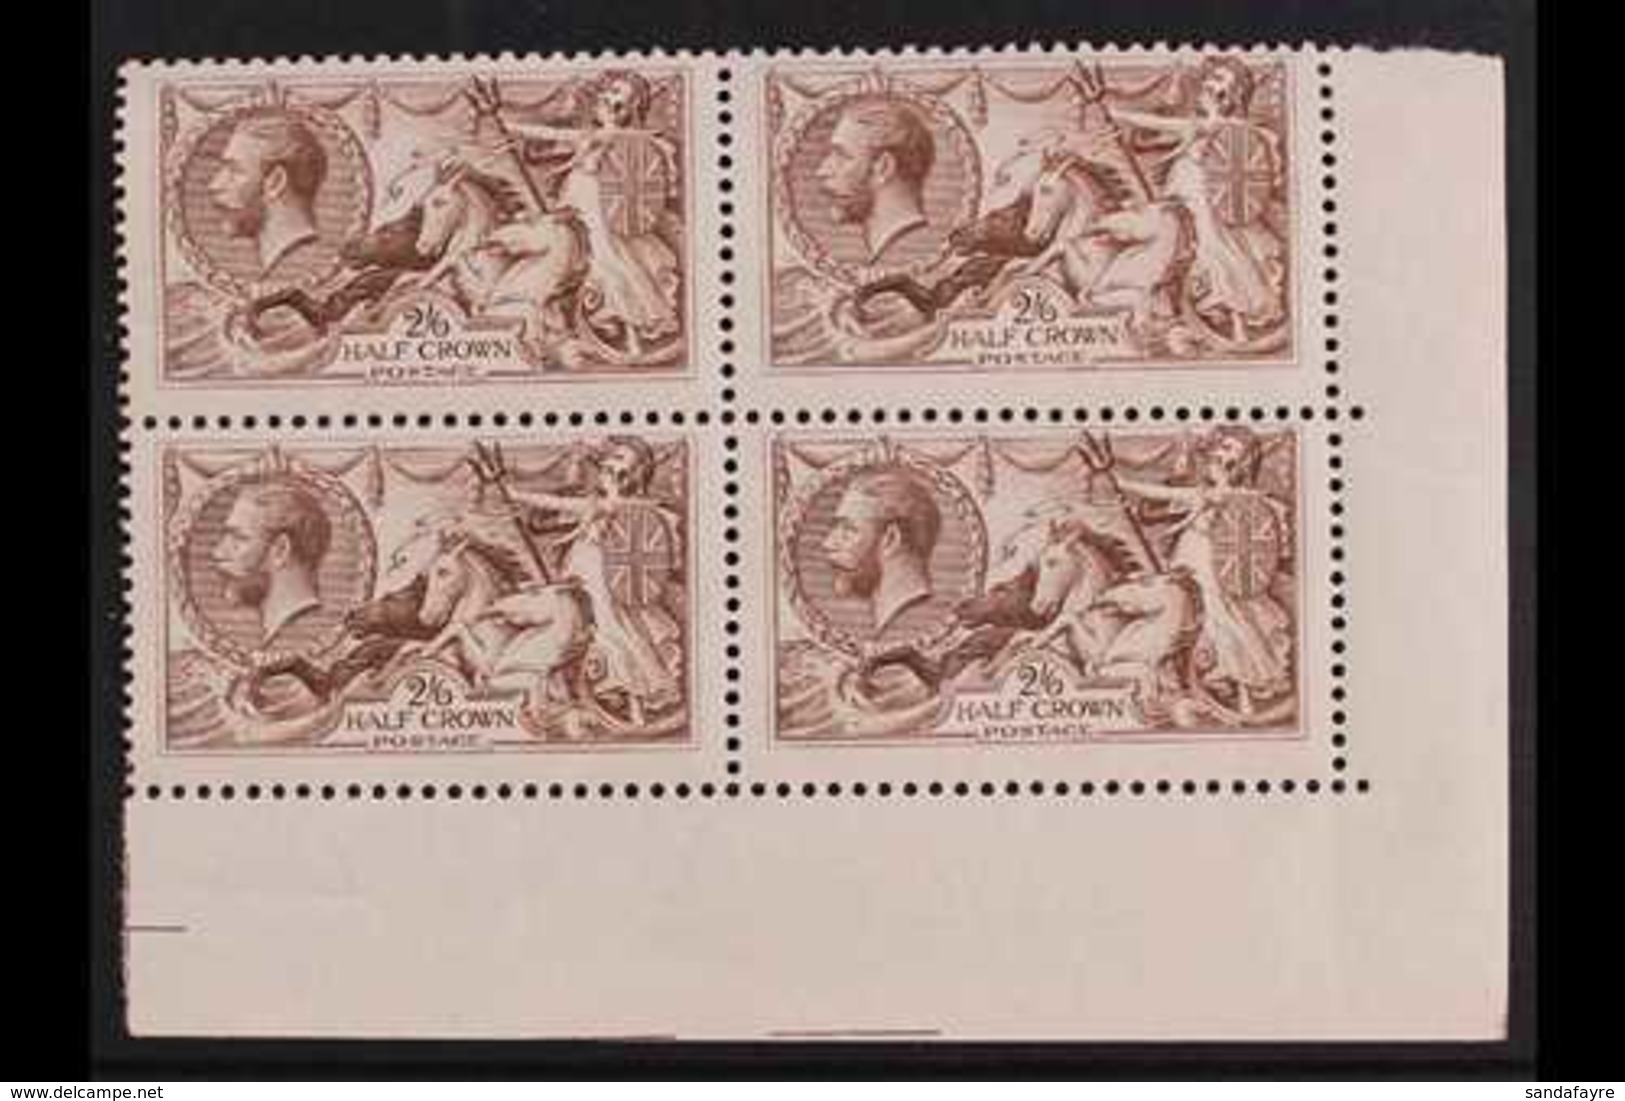 1918-19  2s6d Red-brown Bradbury Seahorse, SG 415, Superb Never Hinged Mint BLOCK OF FOUR From The Bottom-right Corner O - Zonder Classificatie